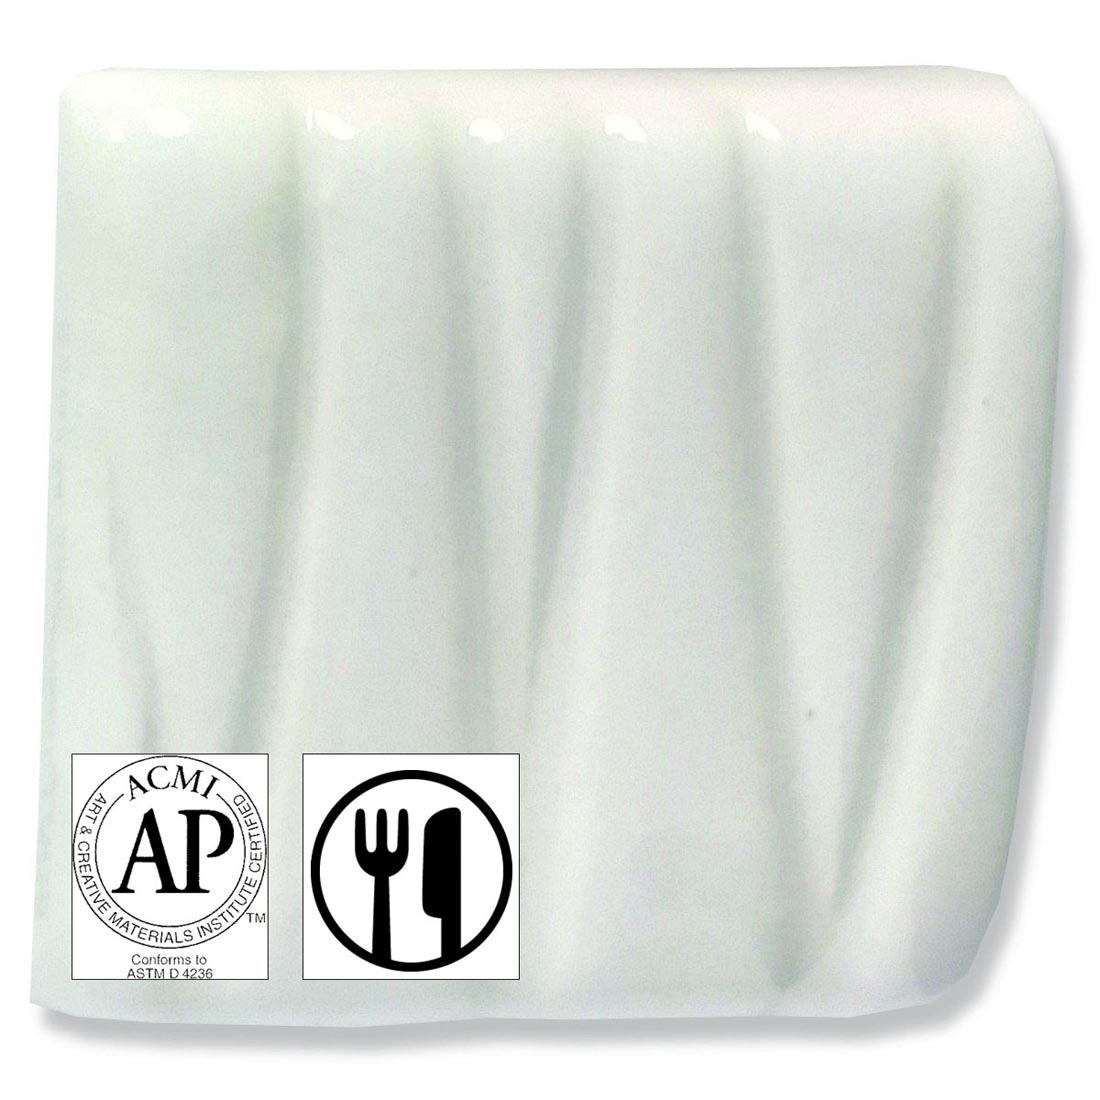 clay tile with Bright White Speedball Low Fire Earthenware Glaze applied; symbols for AP Seal and food safe